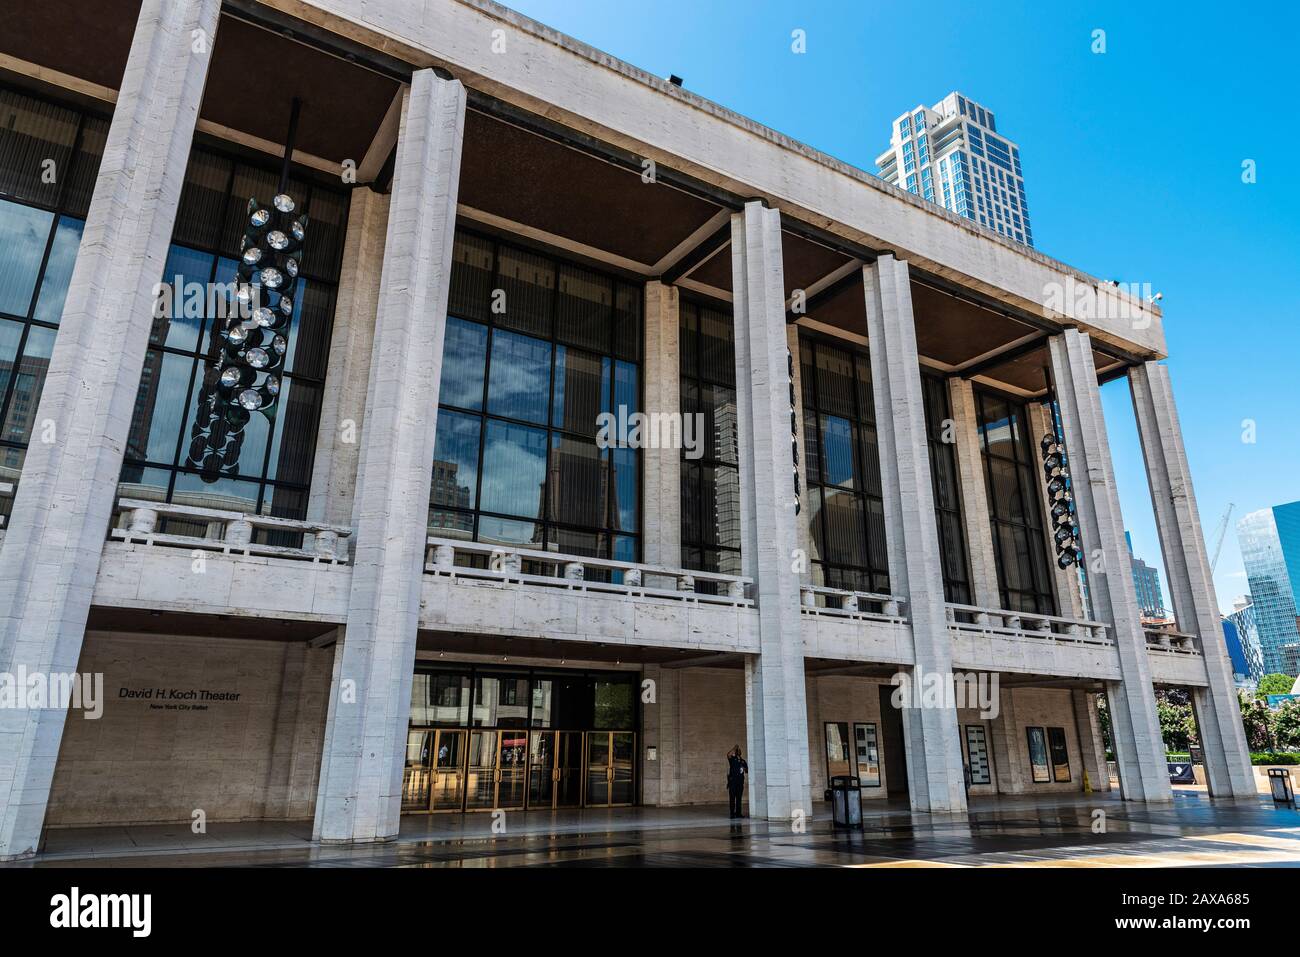 New York City, USA - 3. August 2018: Fassade des David H. Koch Theatre, Theater für Ballett des Lincoln Center for the Performing Arts with People Stockfoto